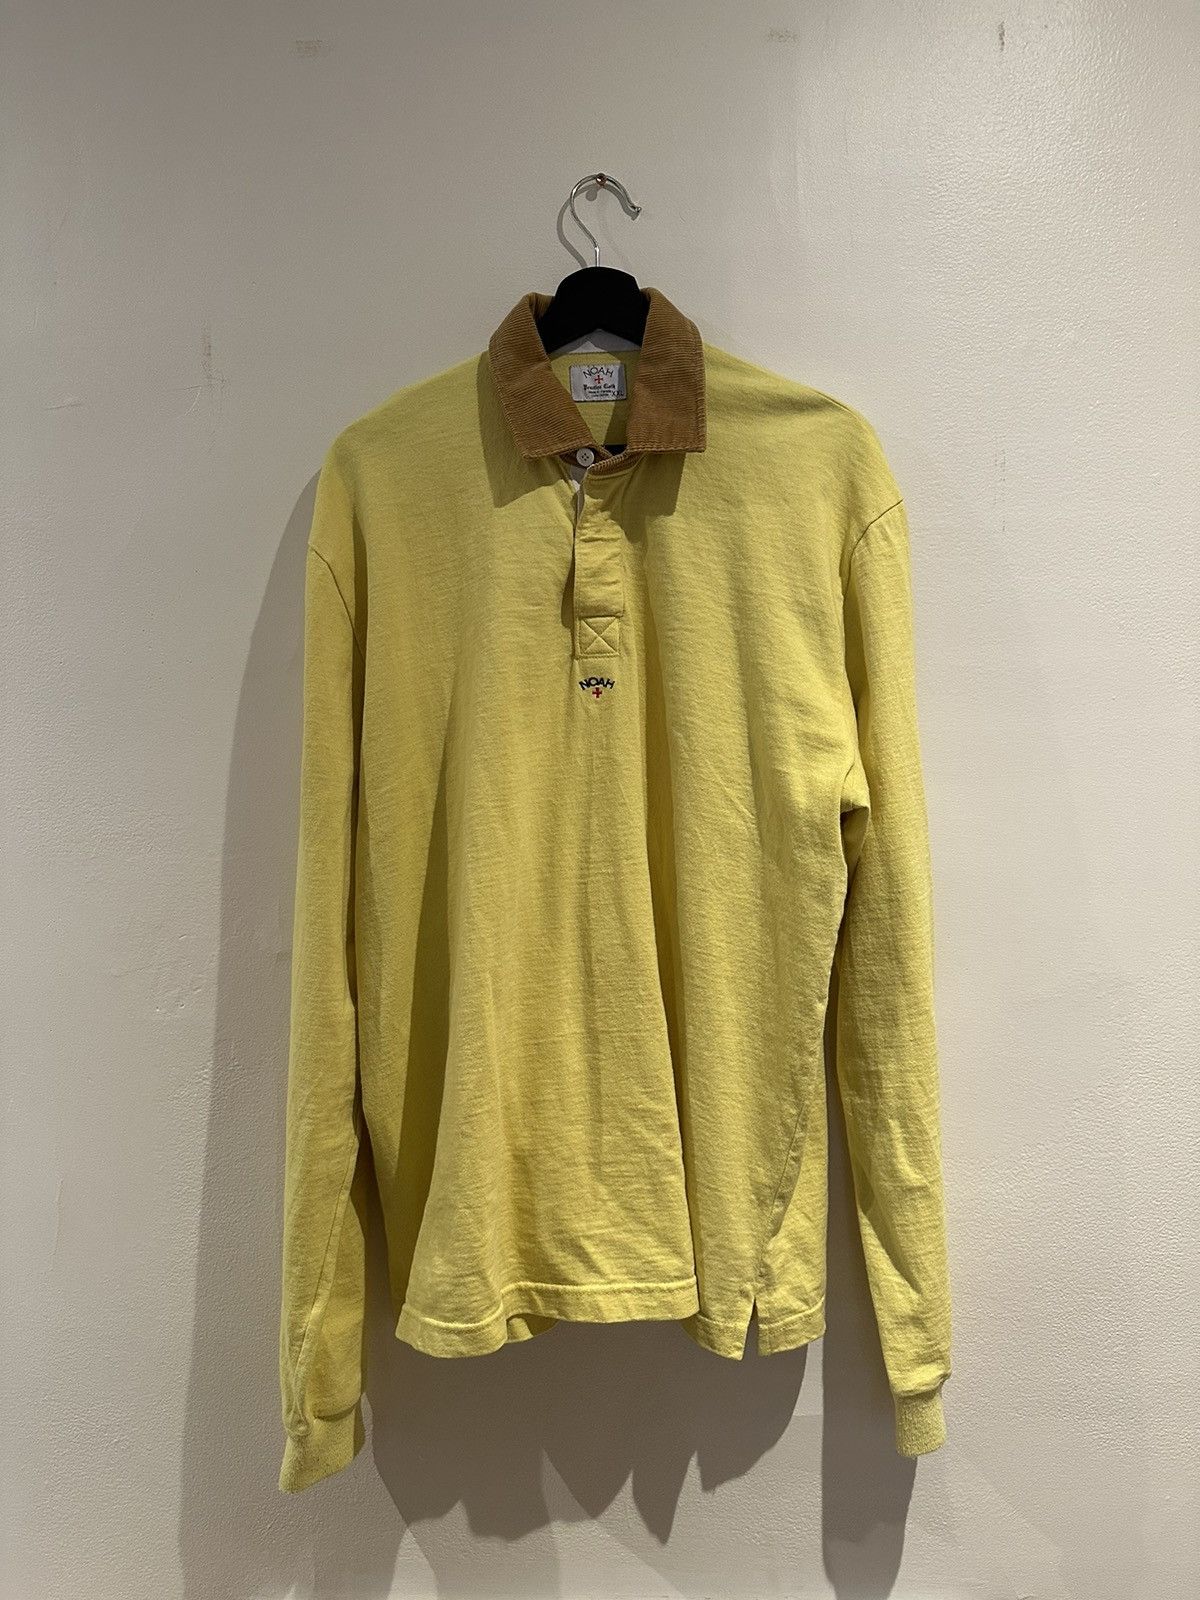 NOAH NYC 2019 SS Corduroy Collar Rugby L - Tシャツ/カットソー(七分